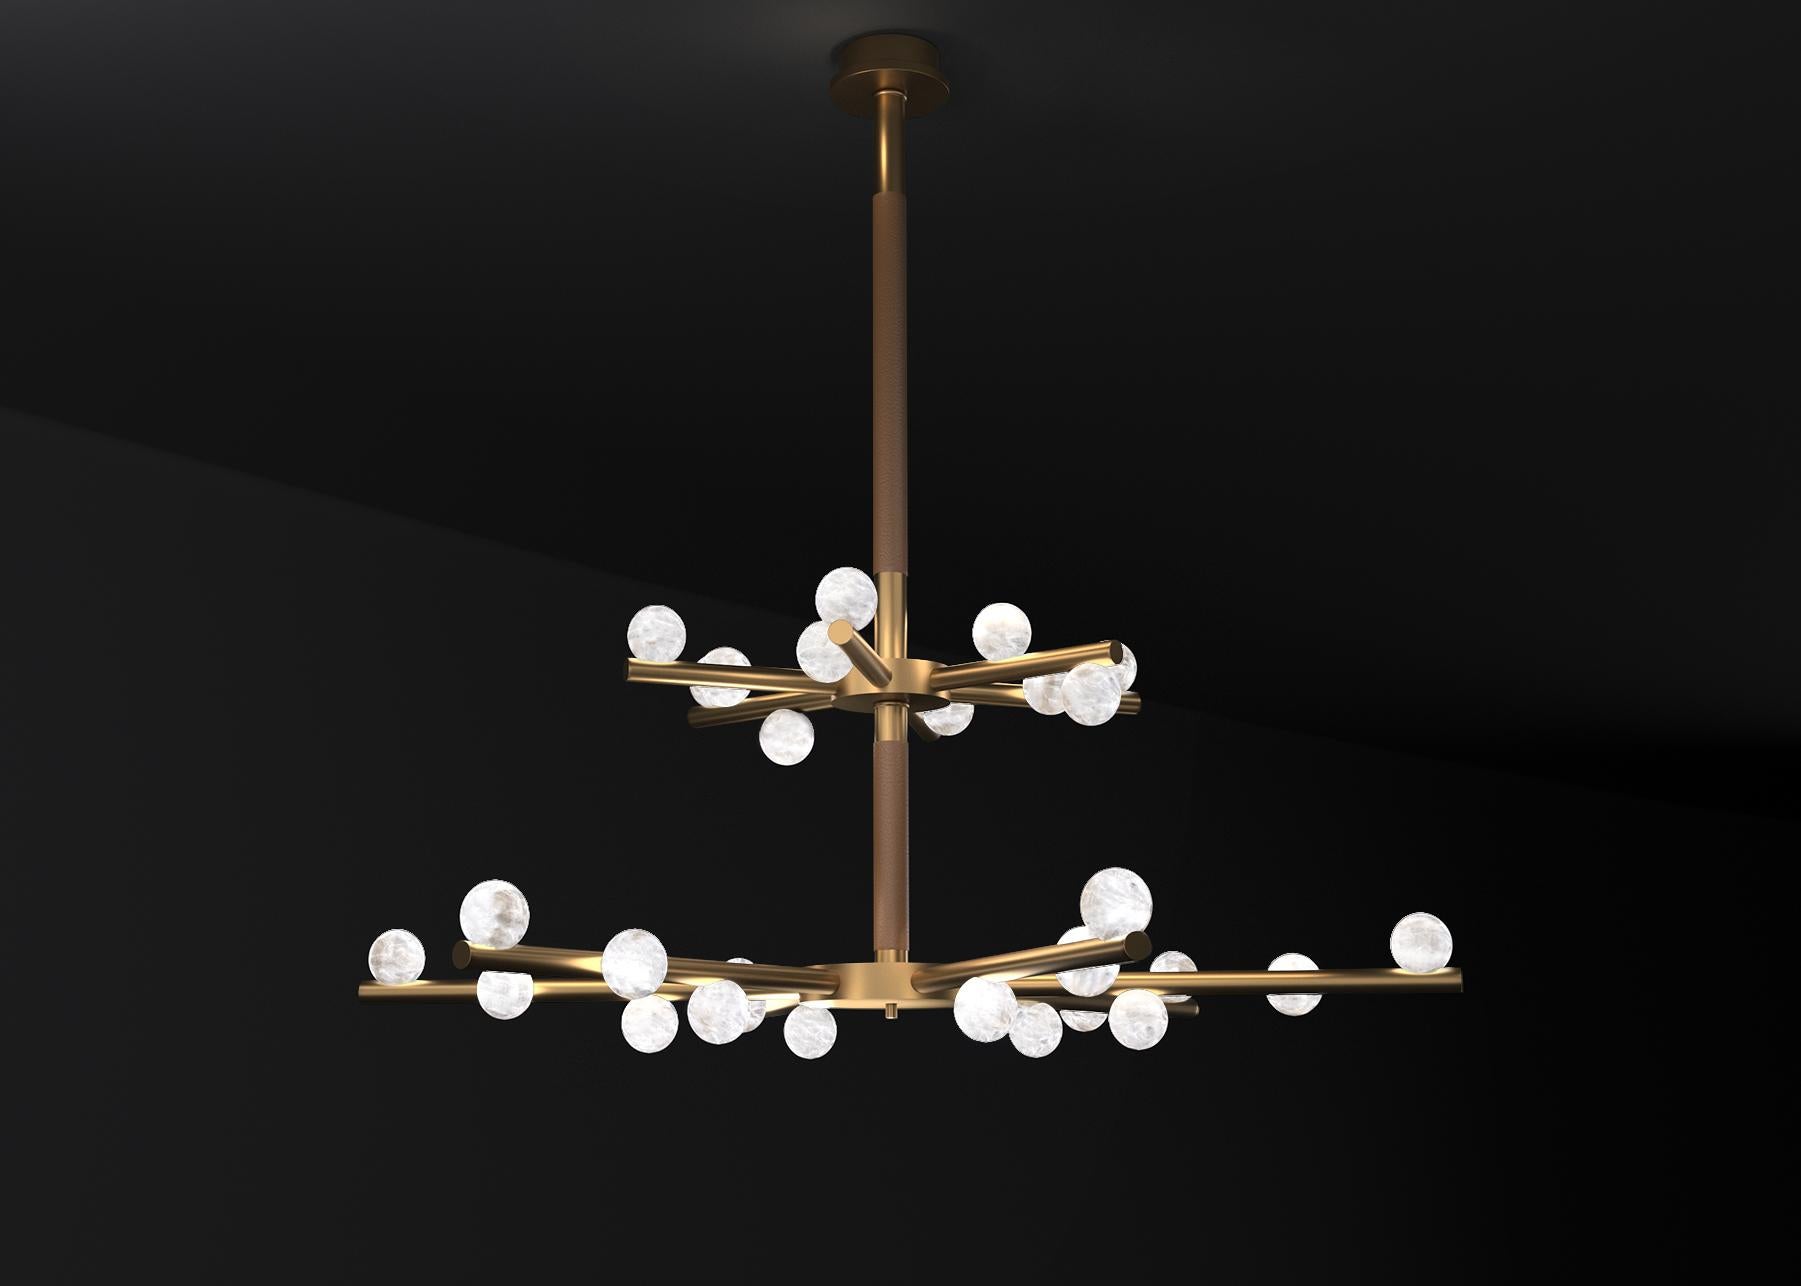 Demetra Bronze Double Chandelier by Alabastro Italiano
Dimensions: D 85 x W 97 x H 96 cm.
Materials: White alabaster, bronze and leather.

Available in different finishes: Shiny Silver, Bronze, Brushed Brass, Ruggine of Florence, Brushed Burnished,